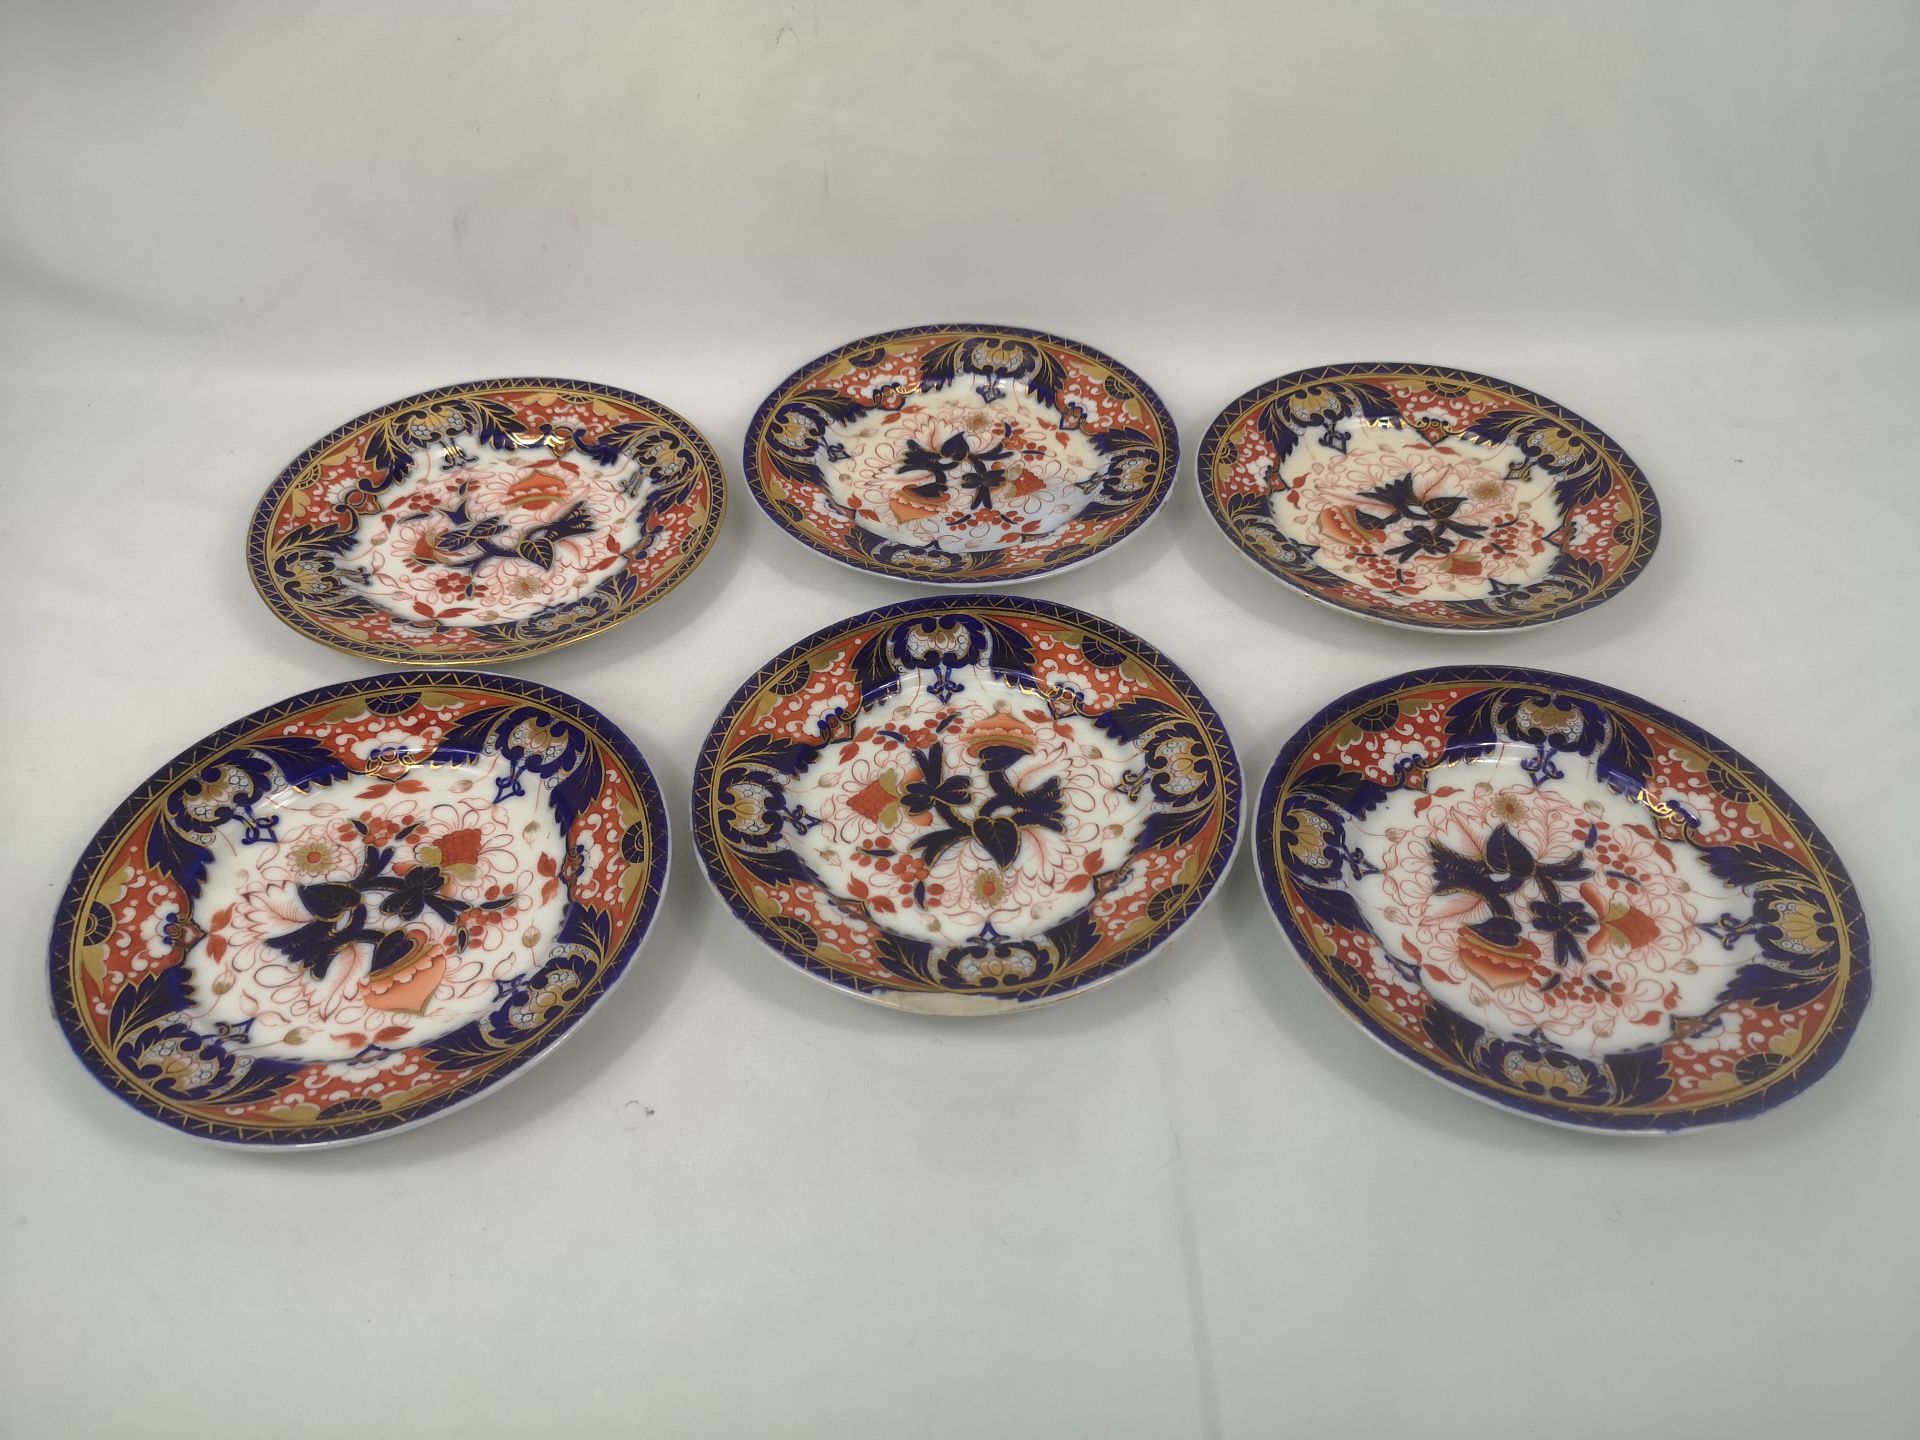 Six decorative plates with gilt highlights - Image 5 of 5